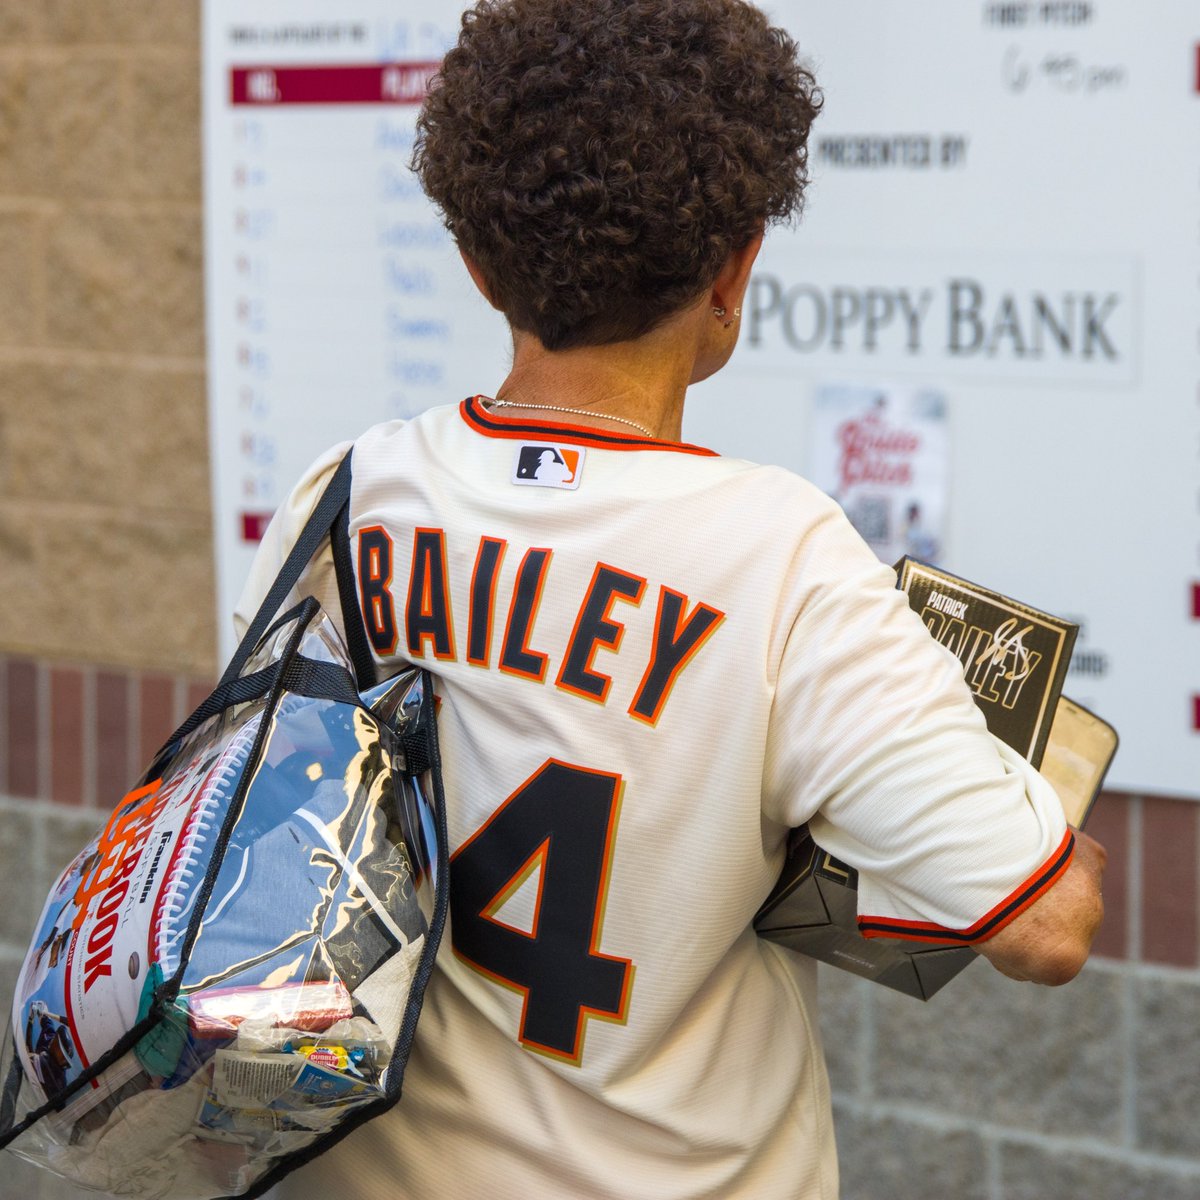 Big thanks to Jackson Rancheria for the awesome Patrick Bailey bobblehead giveaway today & shoutout to the incredible fans who made it even more special! 🙌